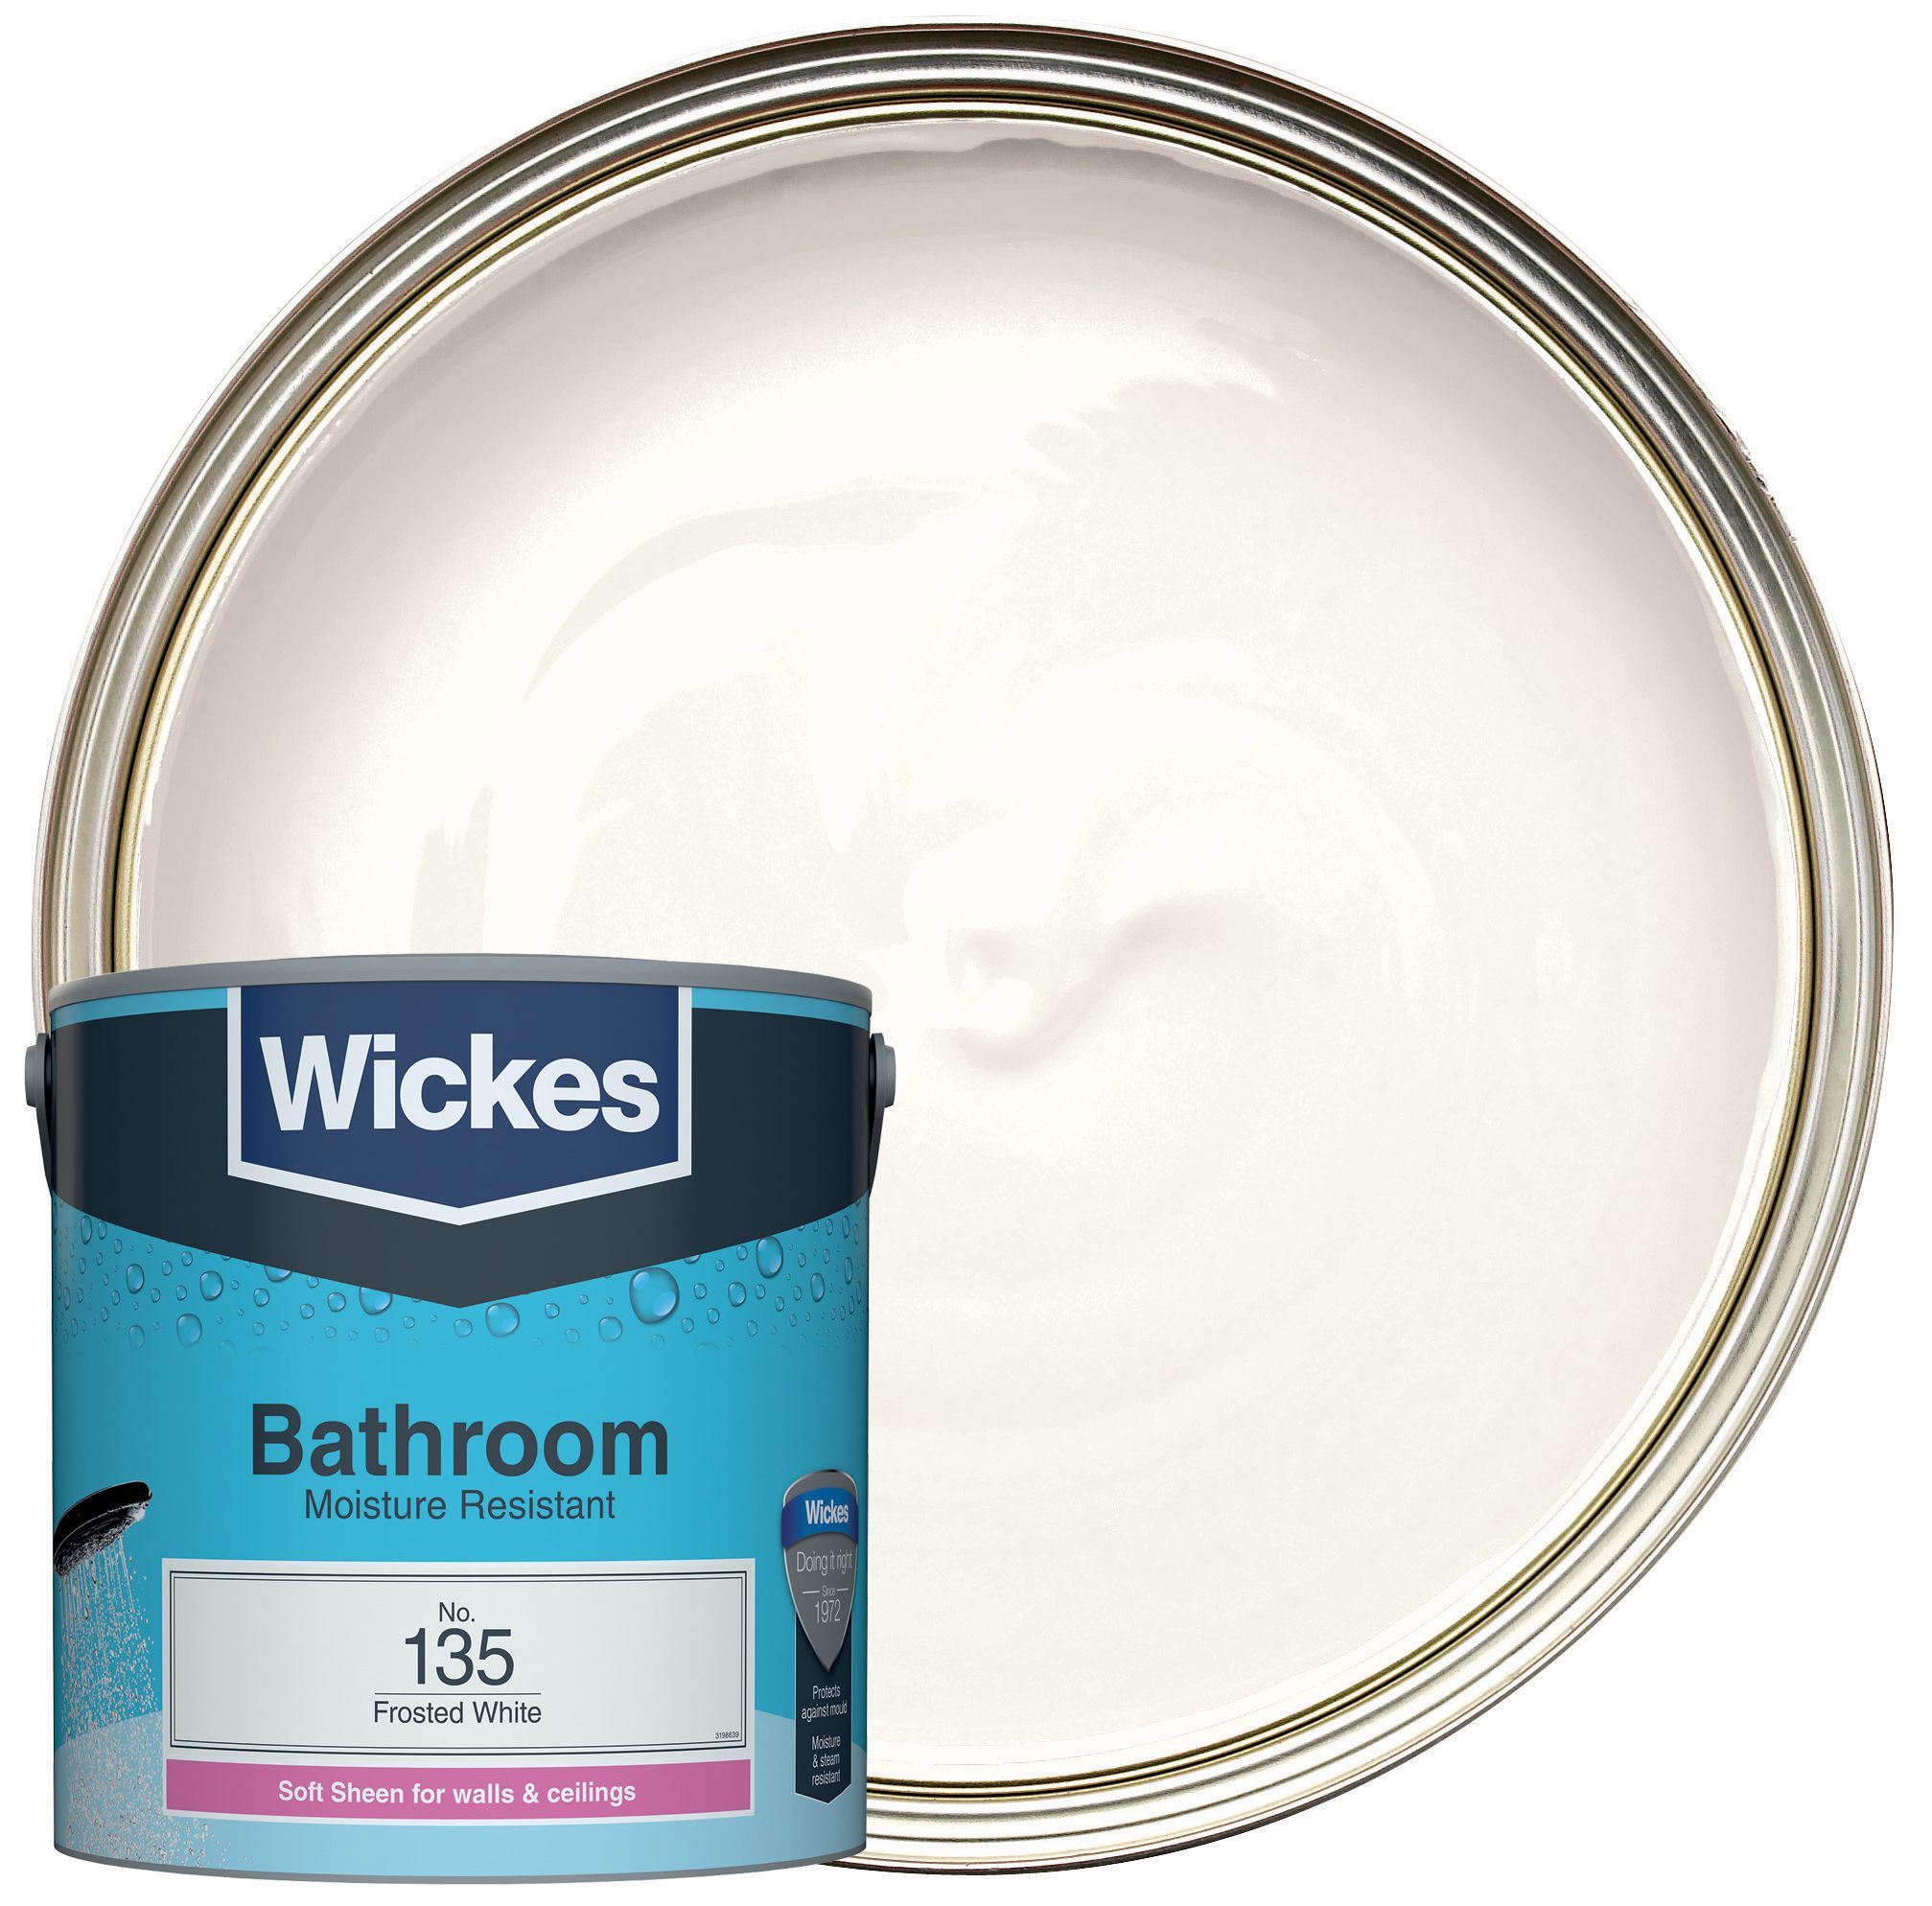 Wickes Bathroom Soft Sheen Emulsion Paint - Frosted White No.135 - 2.5L